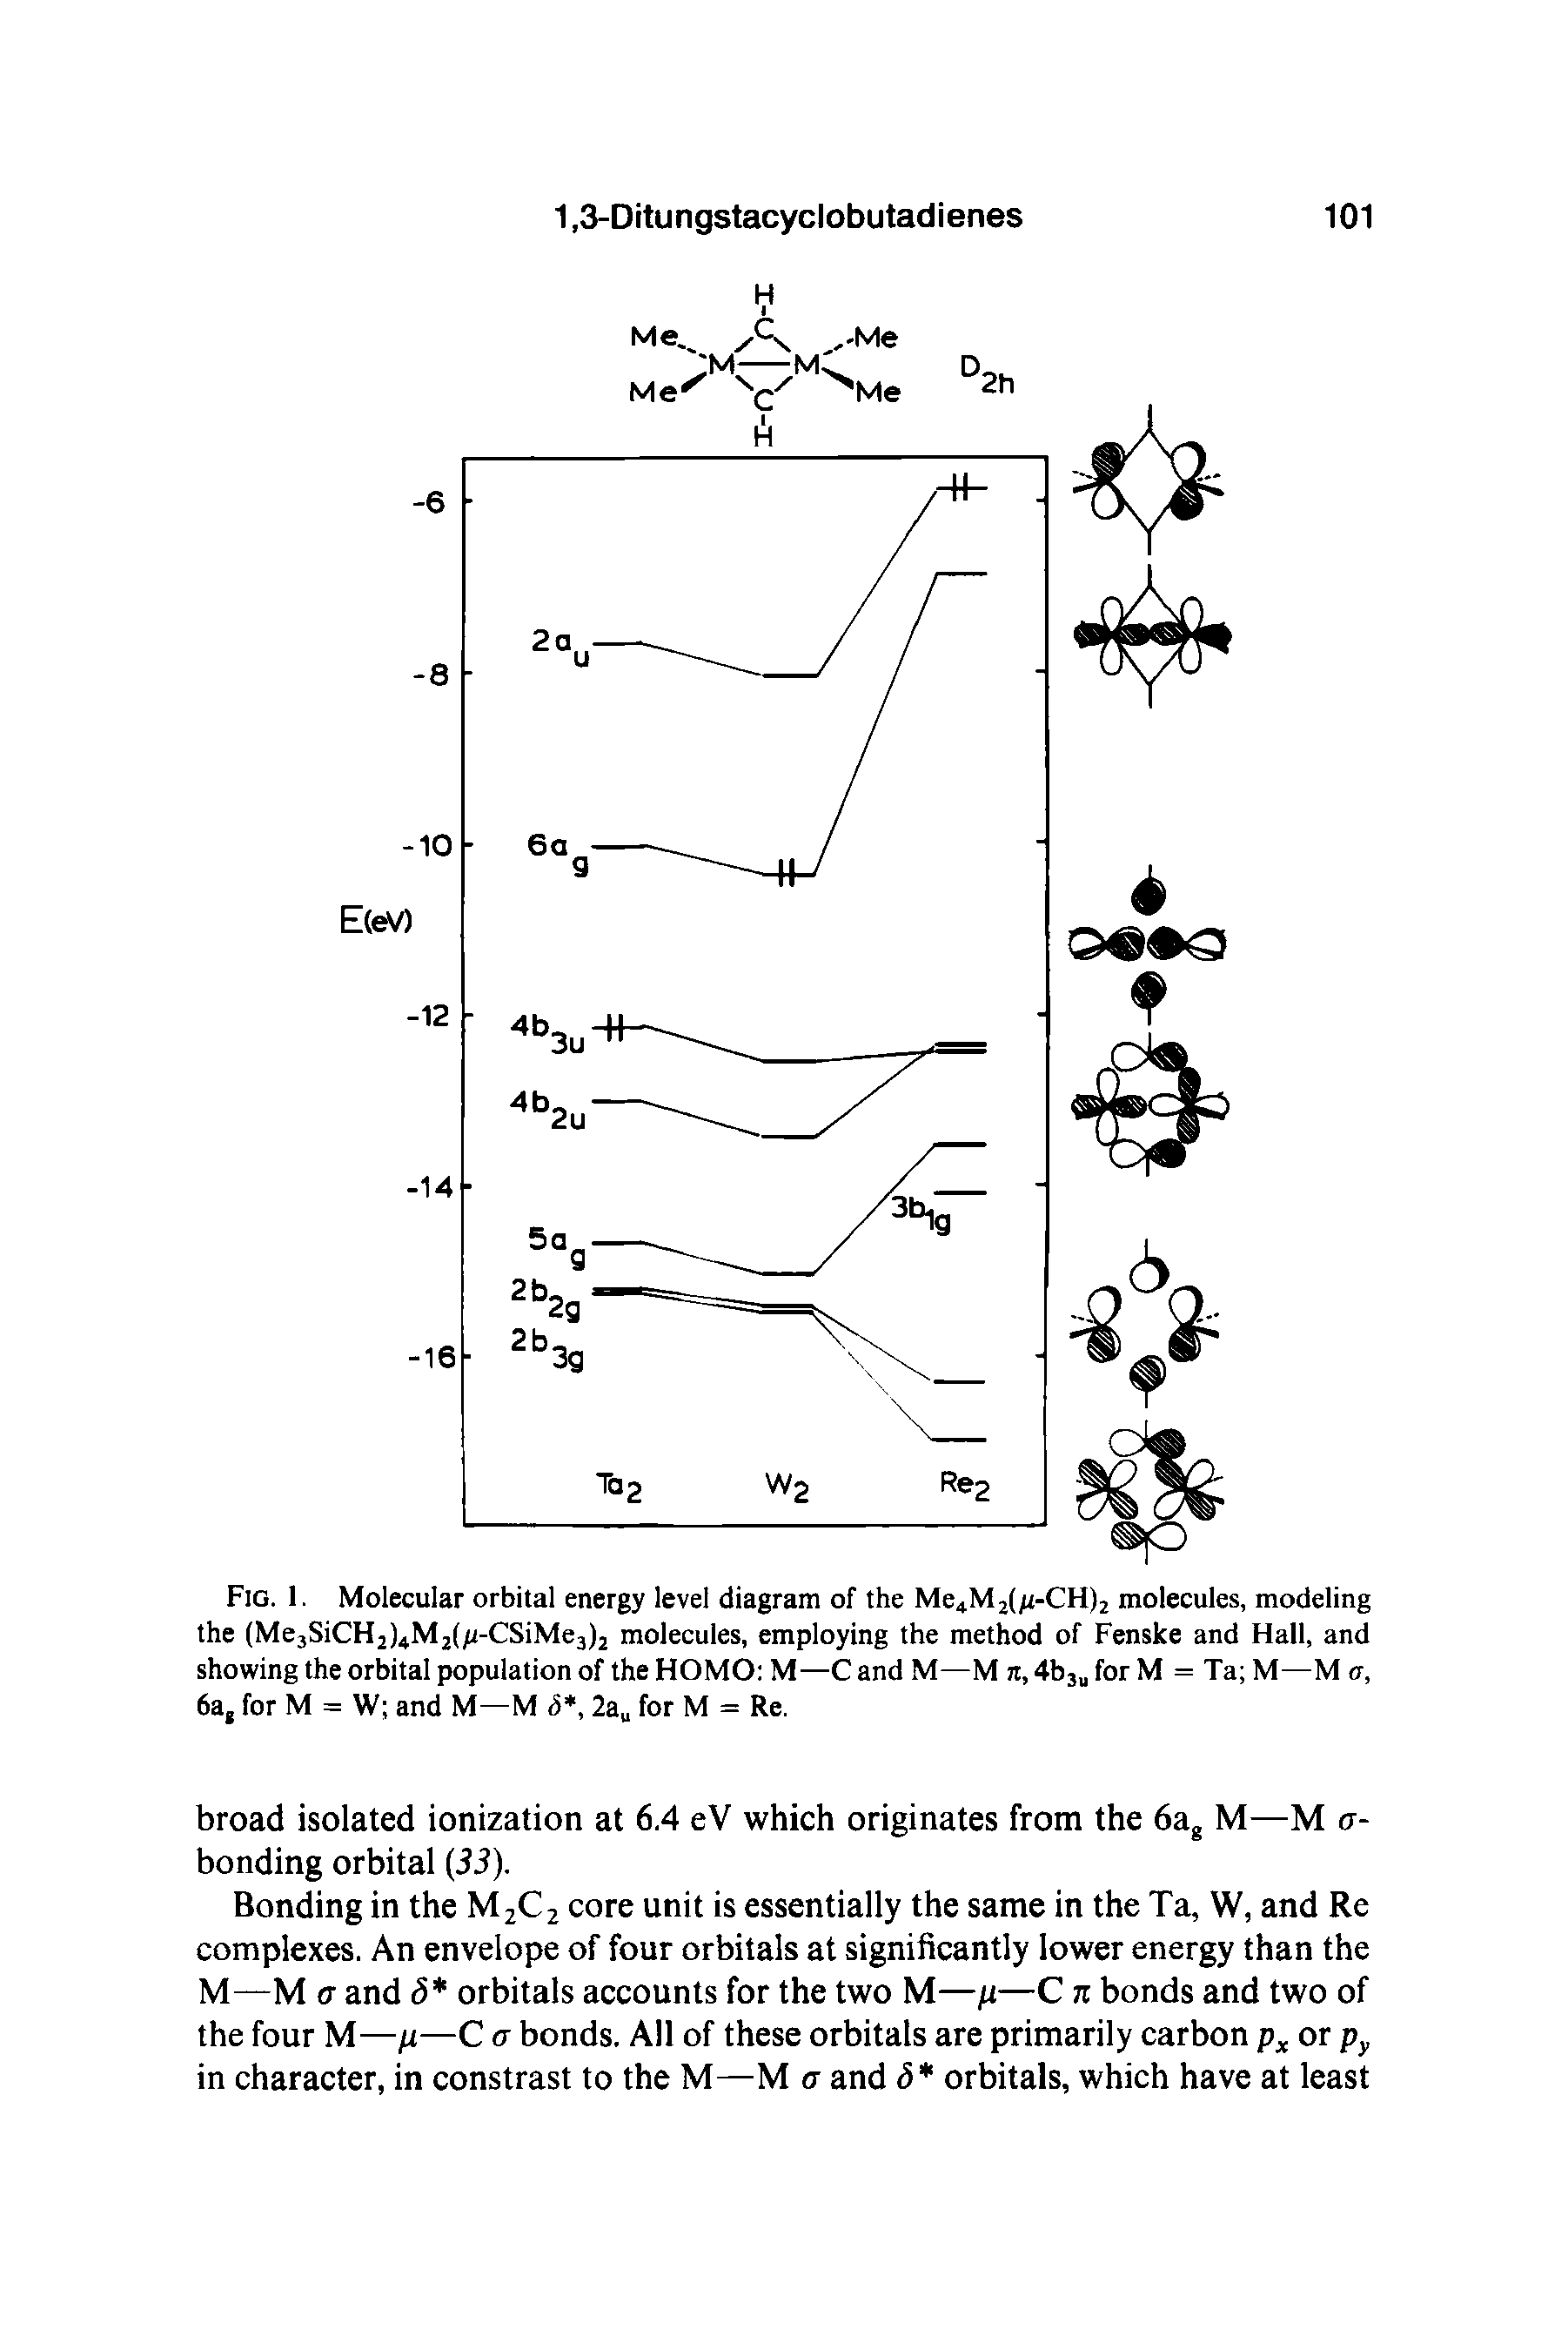 Fig. 1. Molecular orbital energy level diagram of the Me4M2( -CH)2 molecules, modeling the (Me,SiCH2)4M2(/j-CSiMe3)2 molecules, employing the method of Fenske and Hall, and showing the orbital population of the HOMO M—C and M—M n, 4b3u for M = Ta M—M a, 6ag for M = W and M—M S, 2a for M = Re.